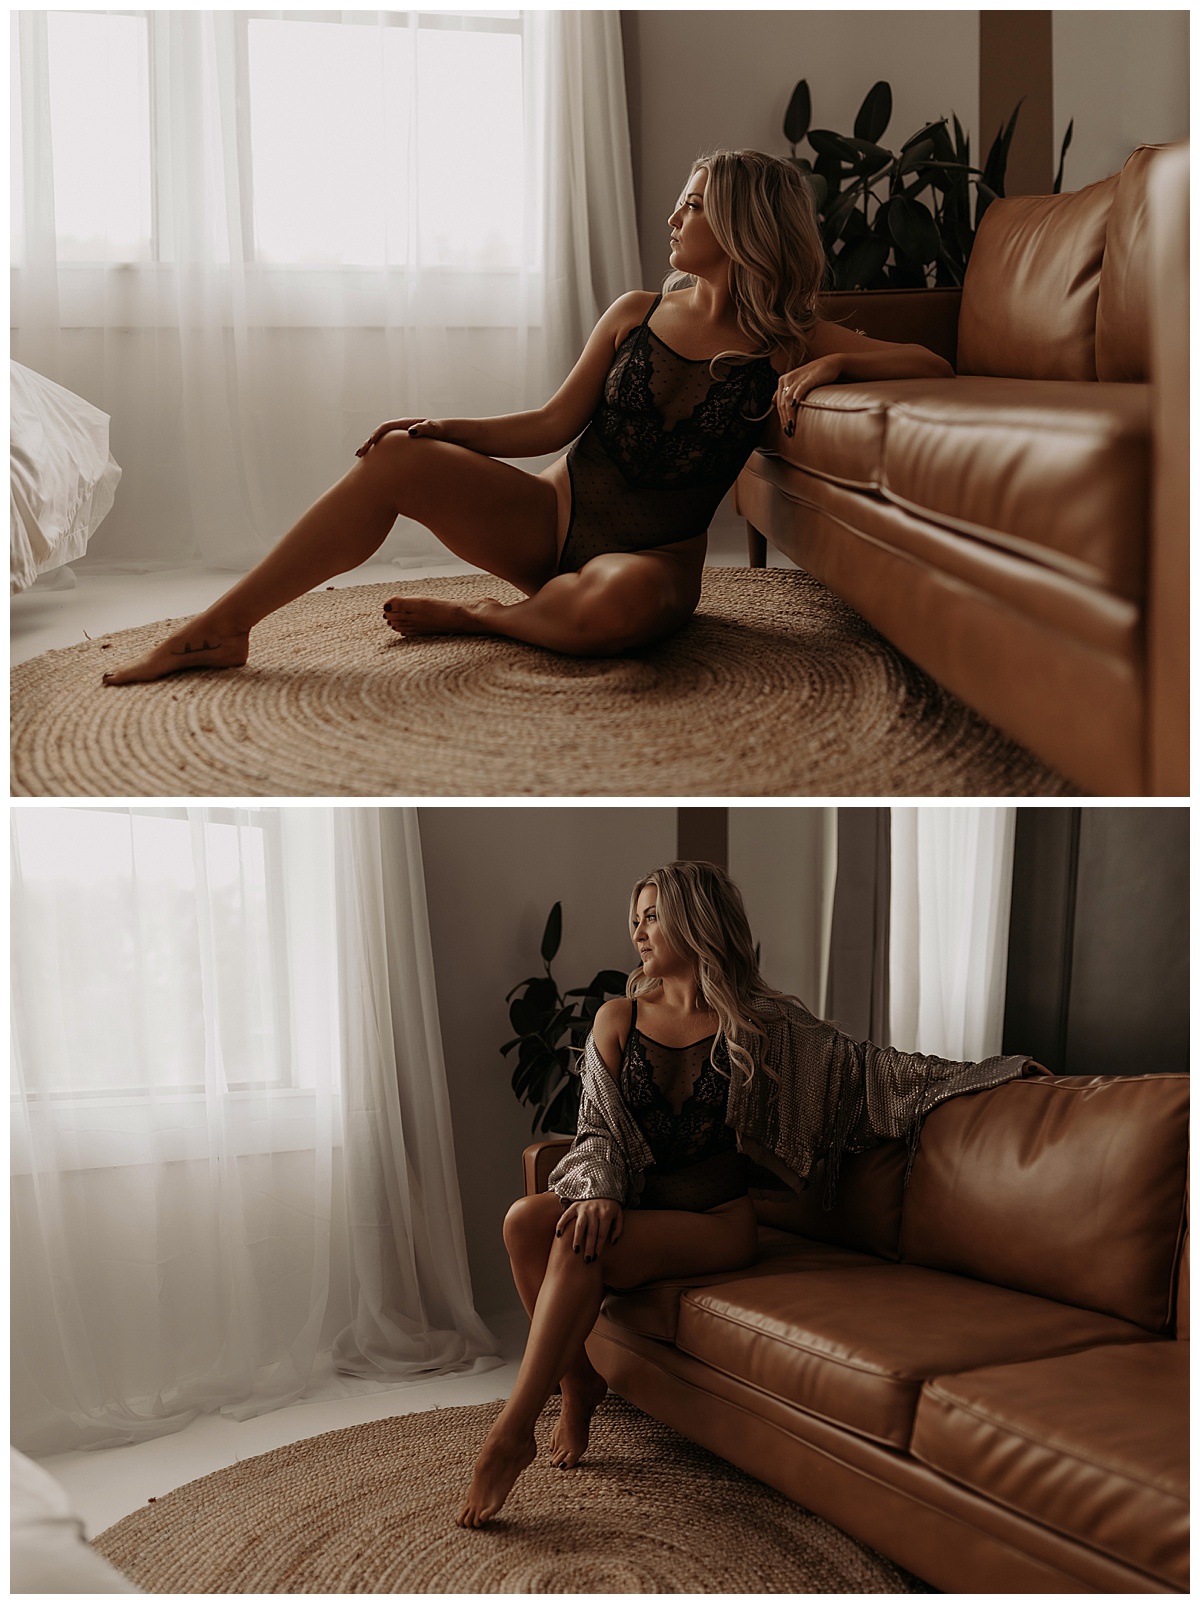 Girl wears black lace lingerie and sits in front of couch after wearing Lingerie slip dress